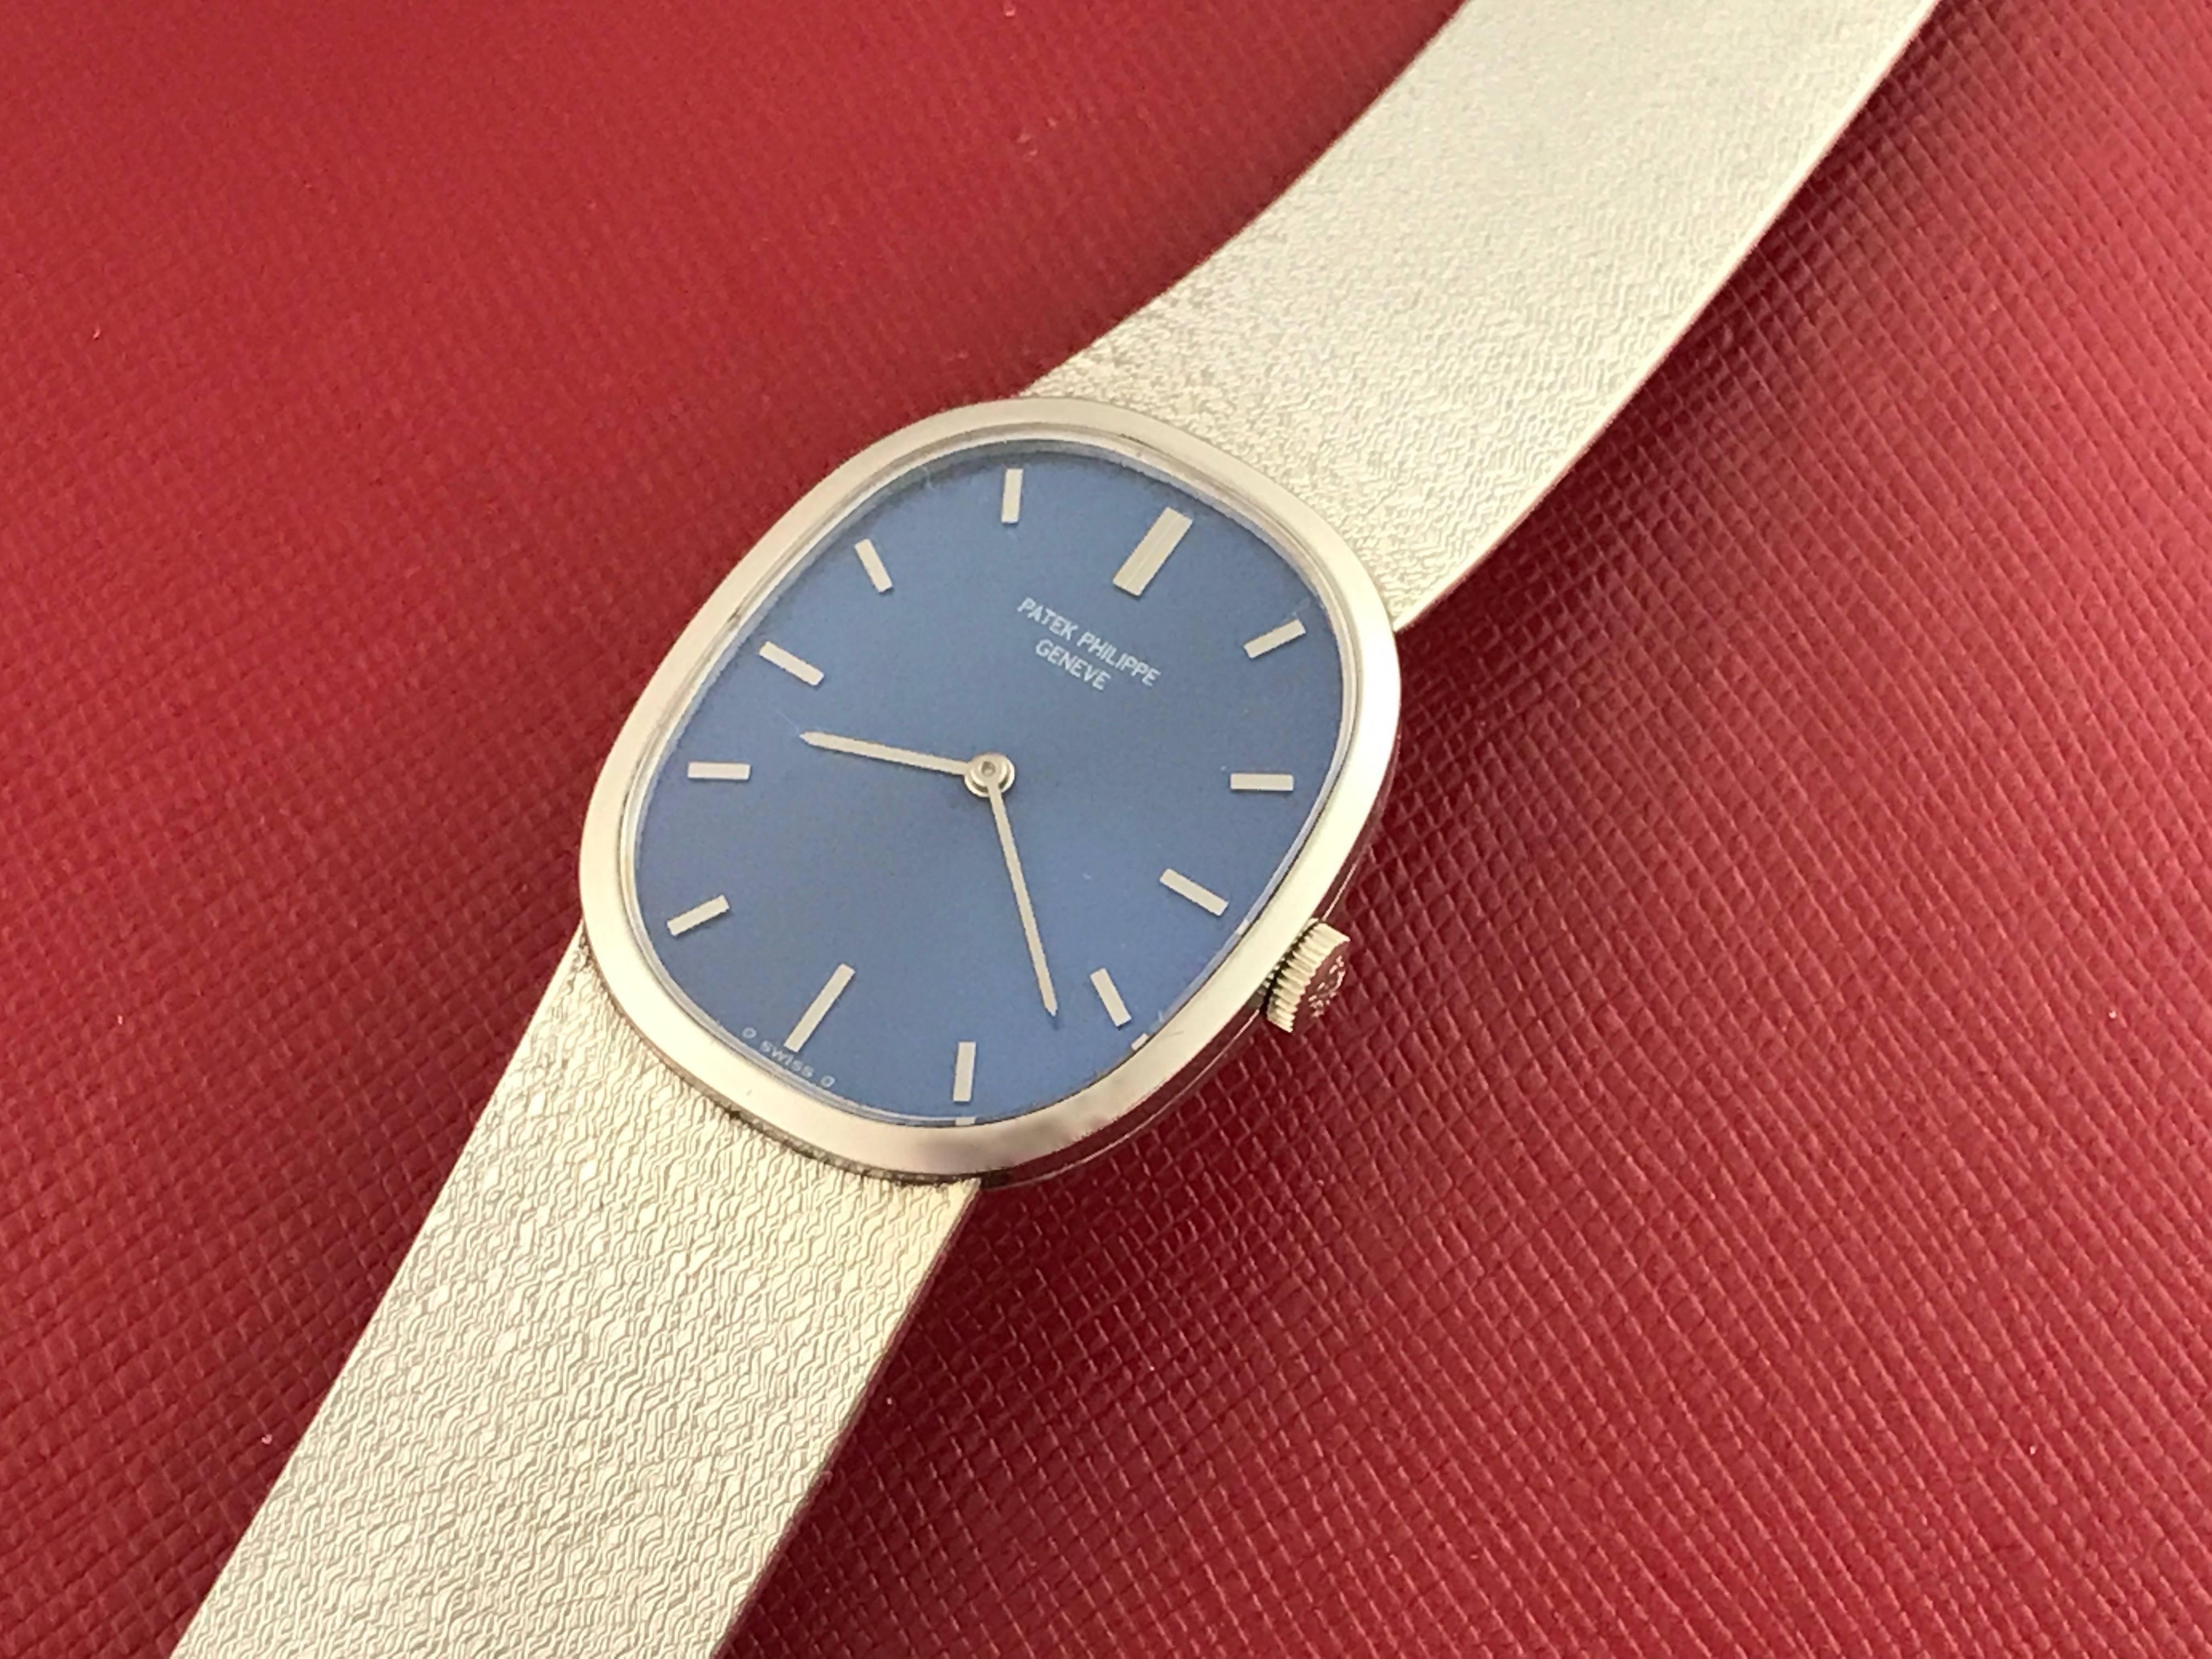 Patek Philippe Ladies 3545/2 Wrist Watch in 18K White  Gold. This is an heirloom piece you can pass down for generations.  This timepiece features an 18K white Gold ellipse case, measuring 27x32mm in diameter.  Blue Dial with Patek Philippe polished